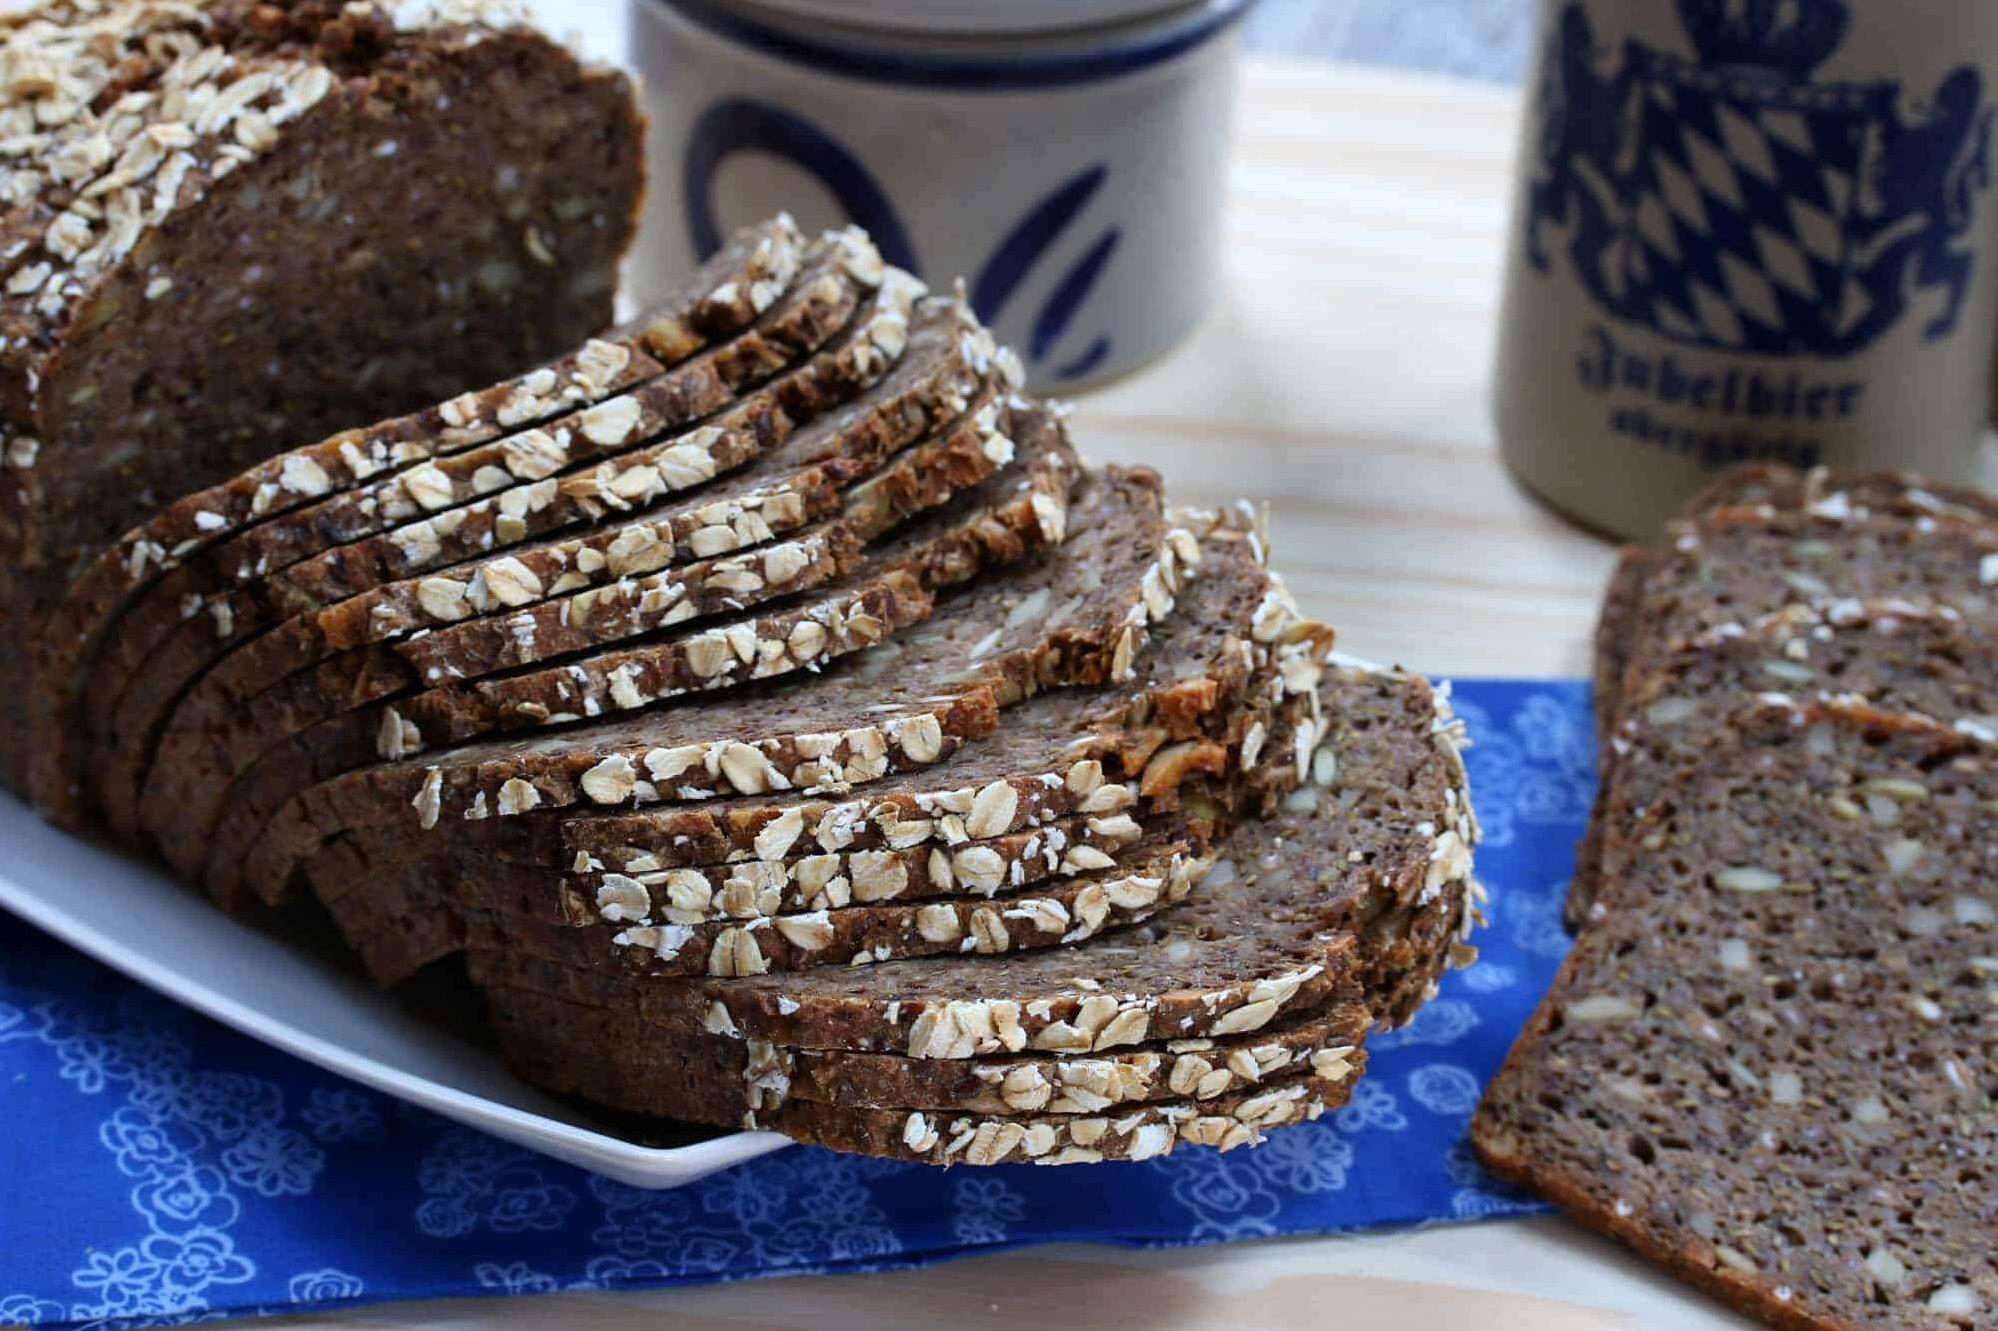  Satisfy your rye cravings with this delicious and nutritious option